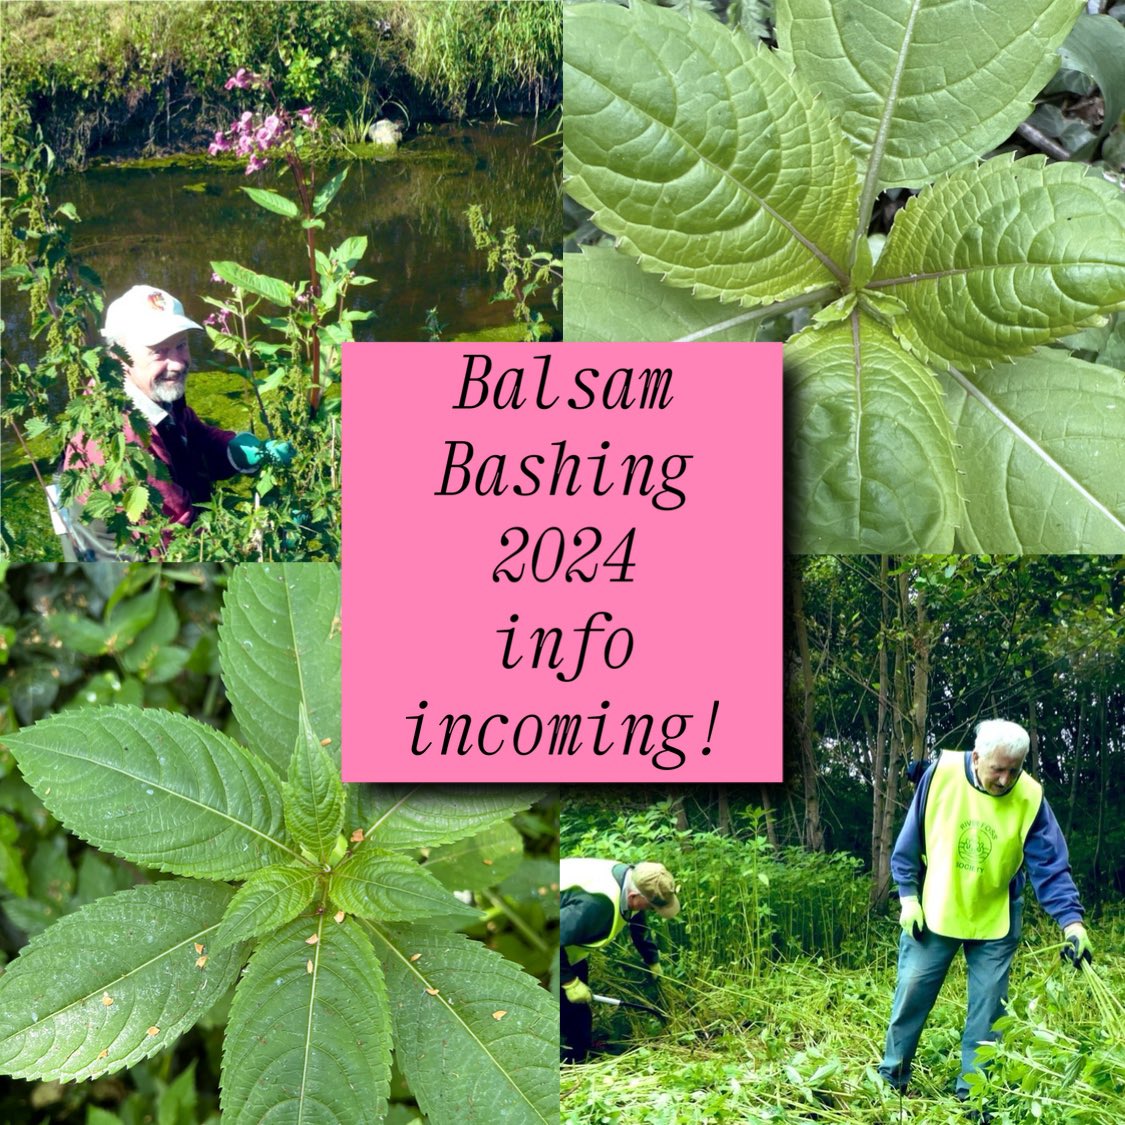 𝑰𝒕’𝒔 𝒕𝒉𝒂𝒕 𝒕𝒊𝒎𝒆 𝒐𝒇 𝒚𝒆𝒂𝒓 𝒂𝒈𝒂𝒊𝒏, and with all the high water events we’ve had this last few months, there’s plenty of balsam coming through. We’re going to start pulling at the beginning of June and carry on until it goes to seed!
#INNS #INNSweek #York